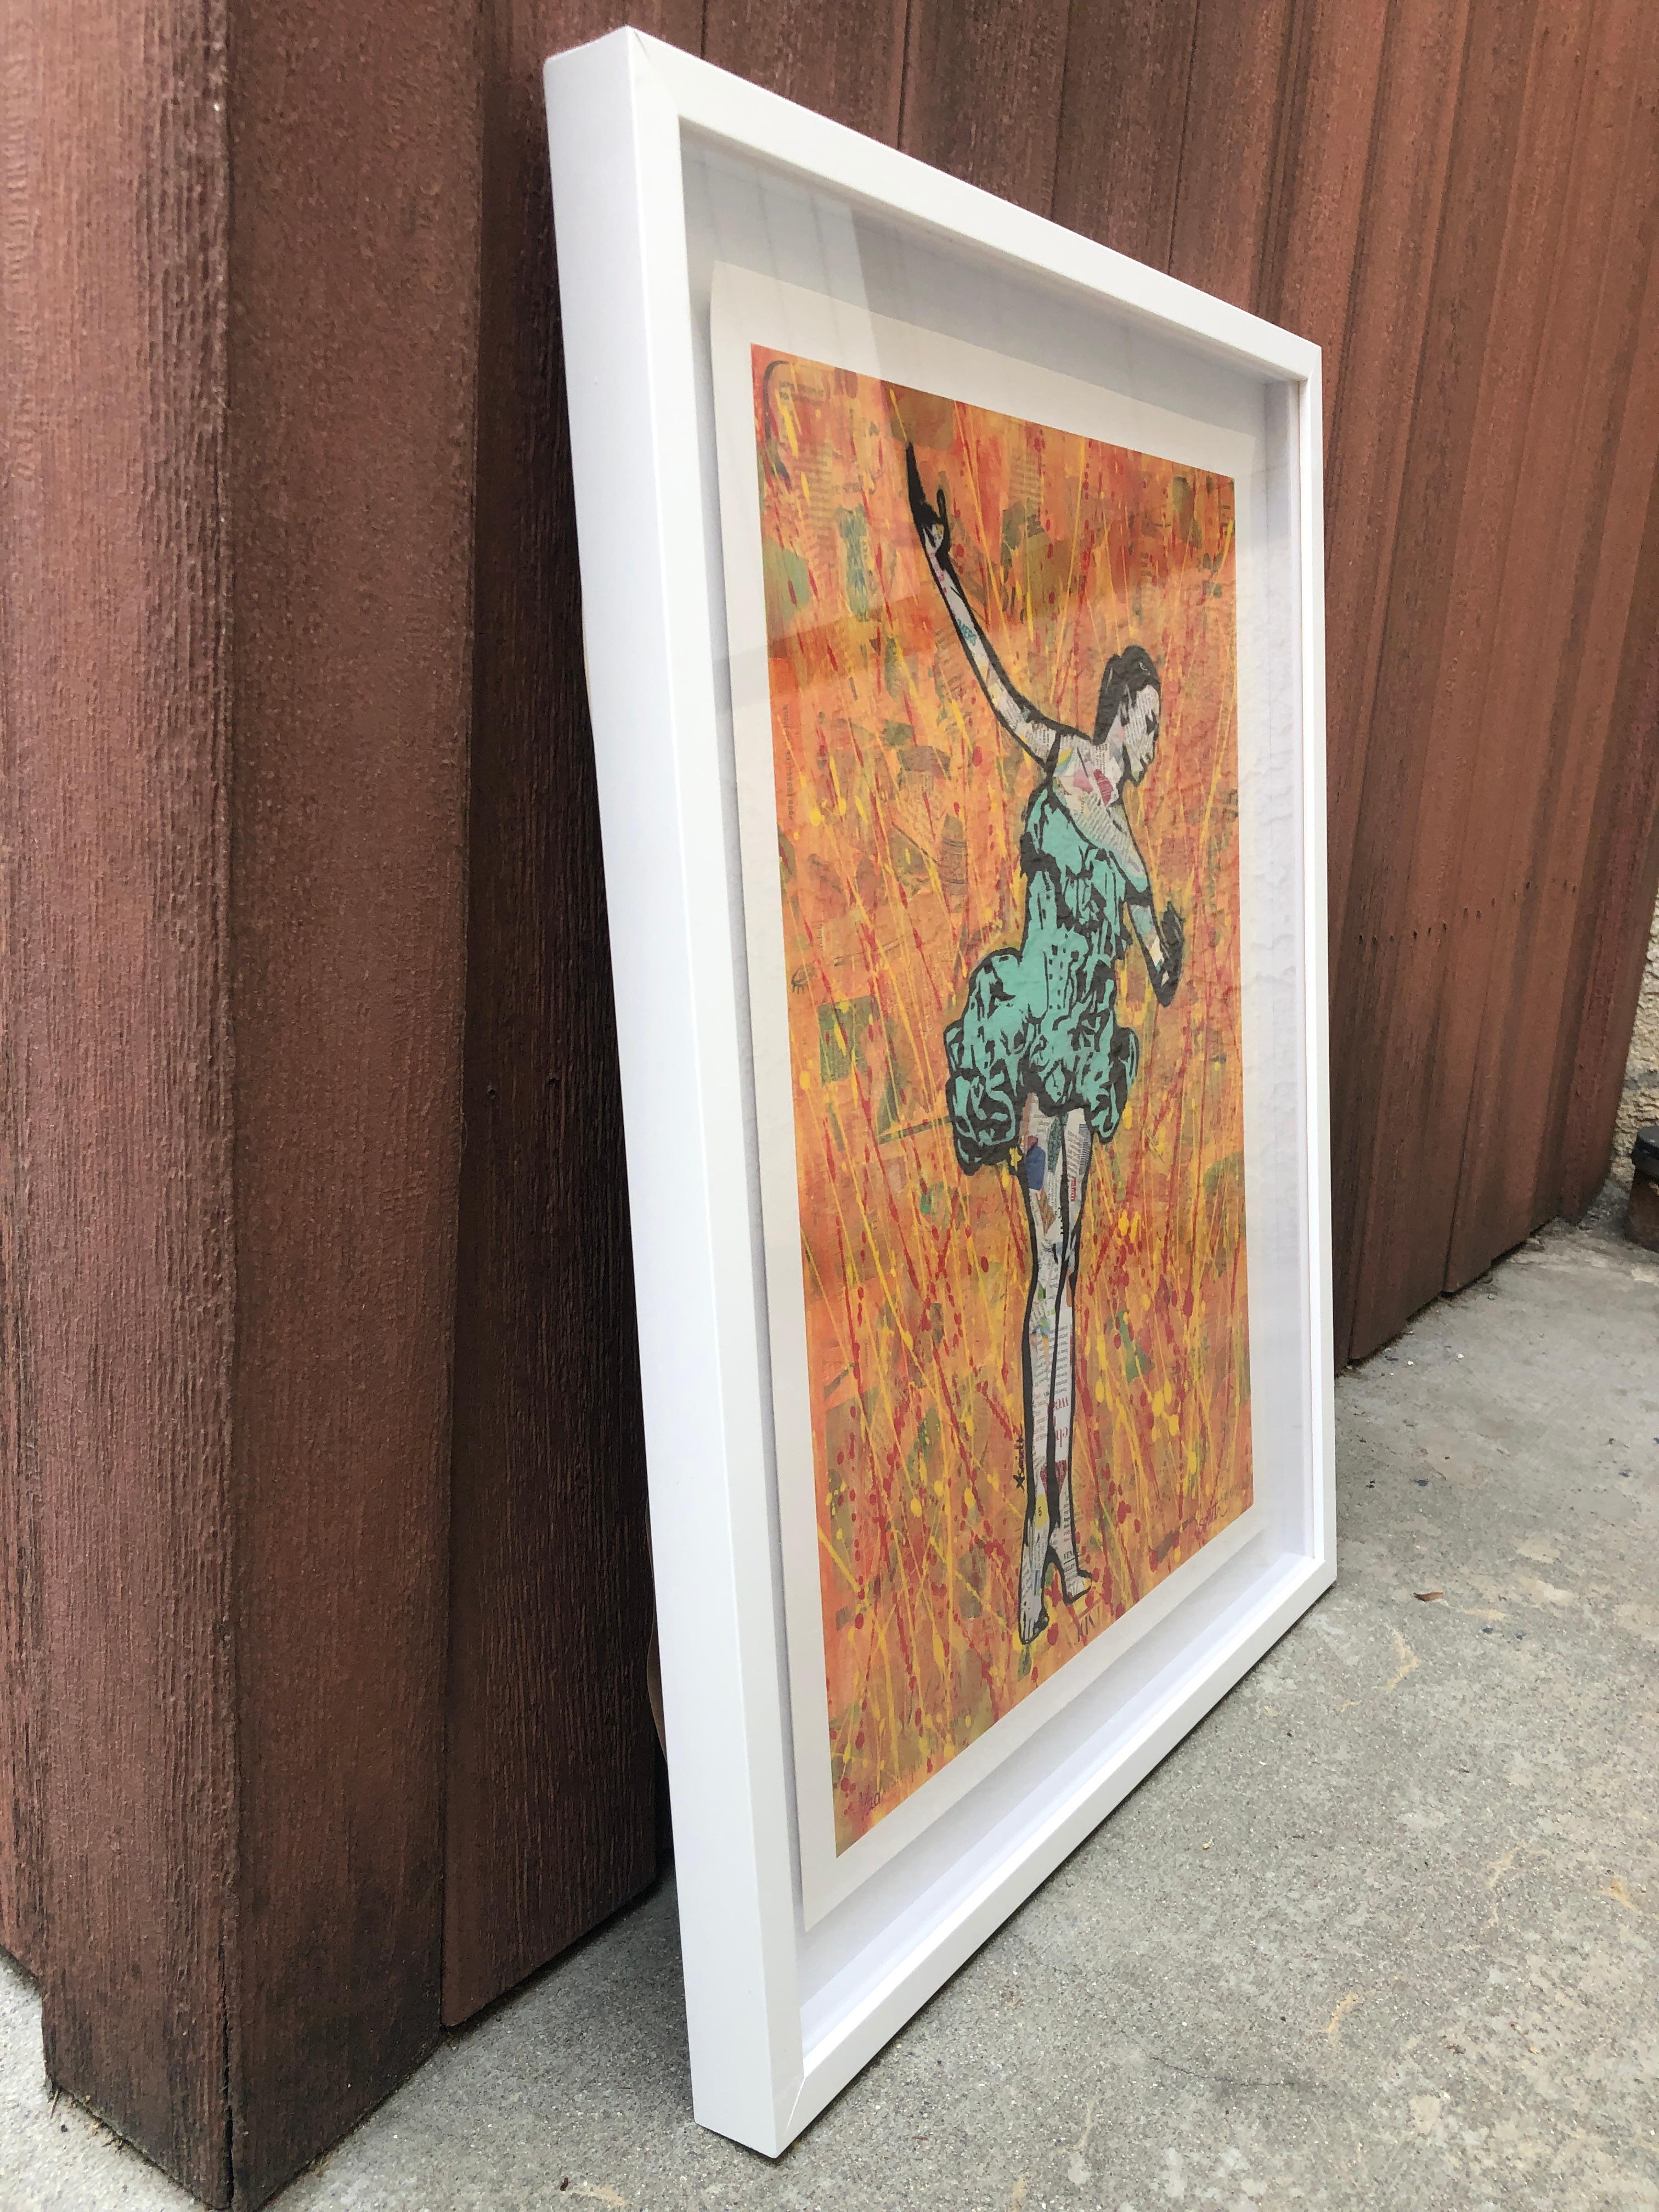 Fire Dancer - Framed Contemporary Pop Art Print of Ballet  + Orange and Teal - Blue Figurative Painting by Amy Smith